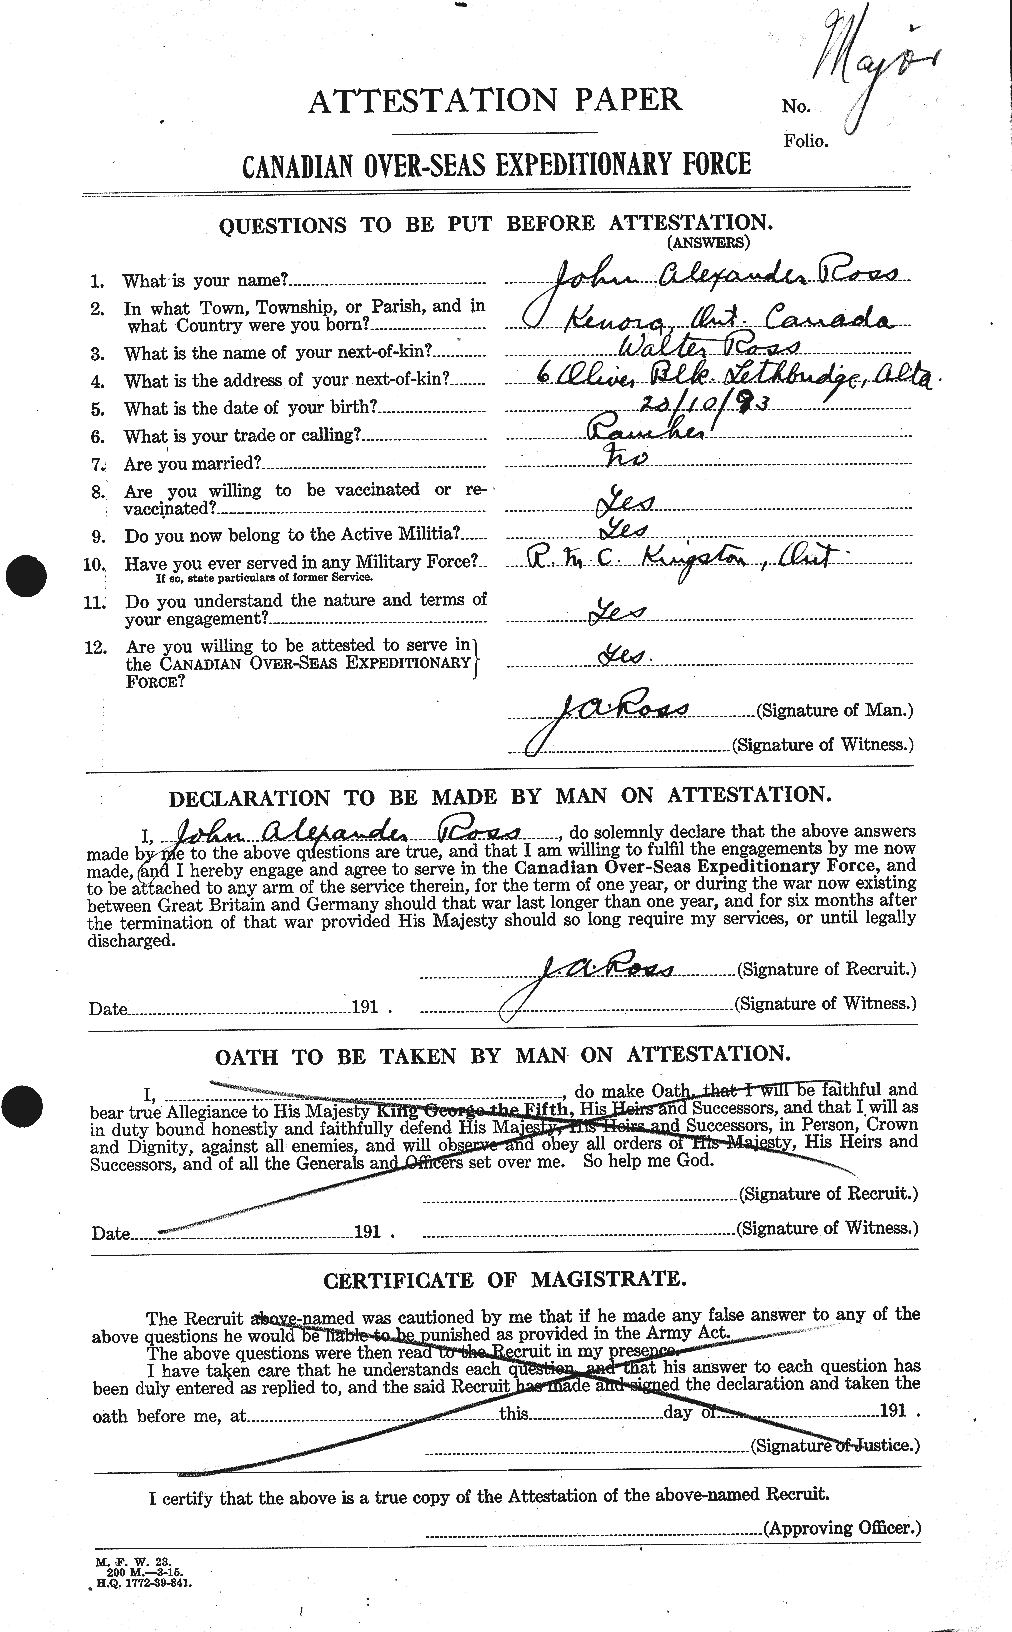 Personnel Records of the First World War - CEF 613386a